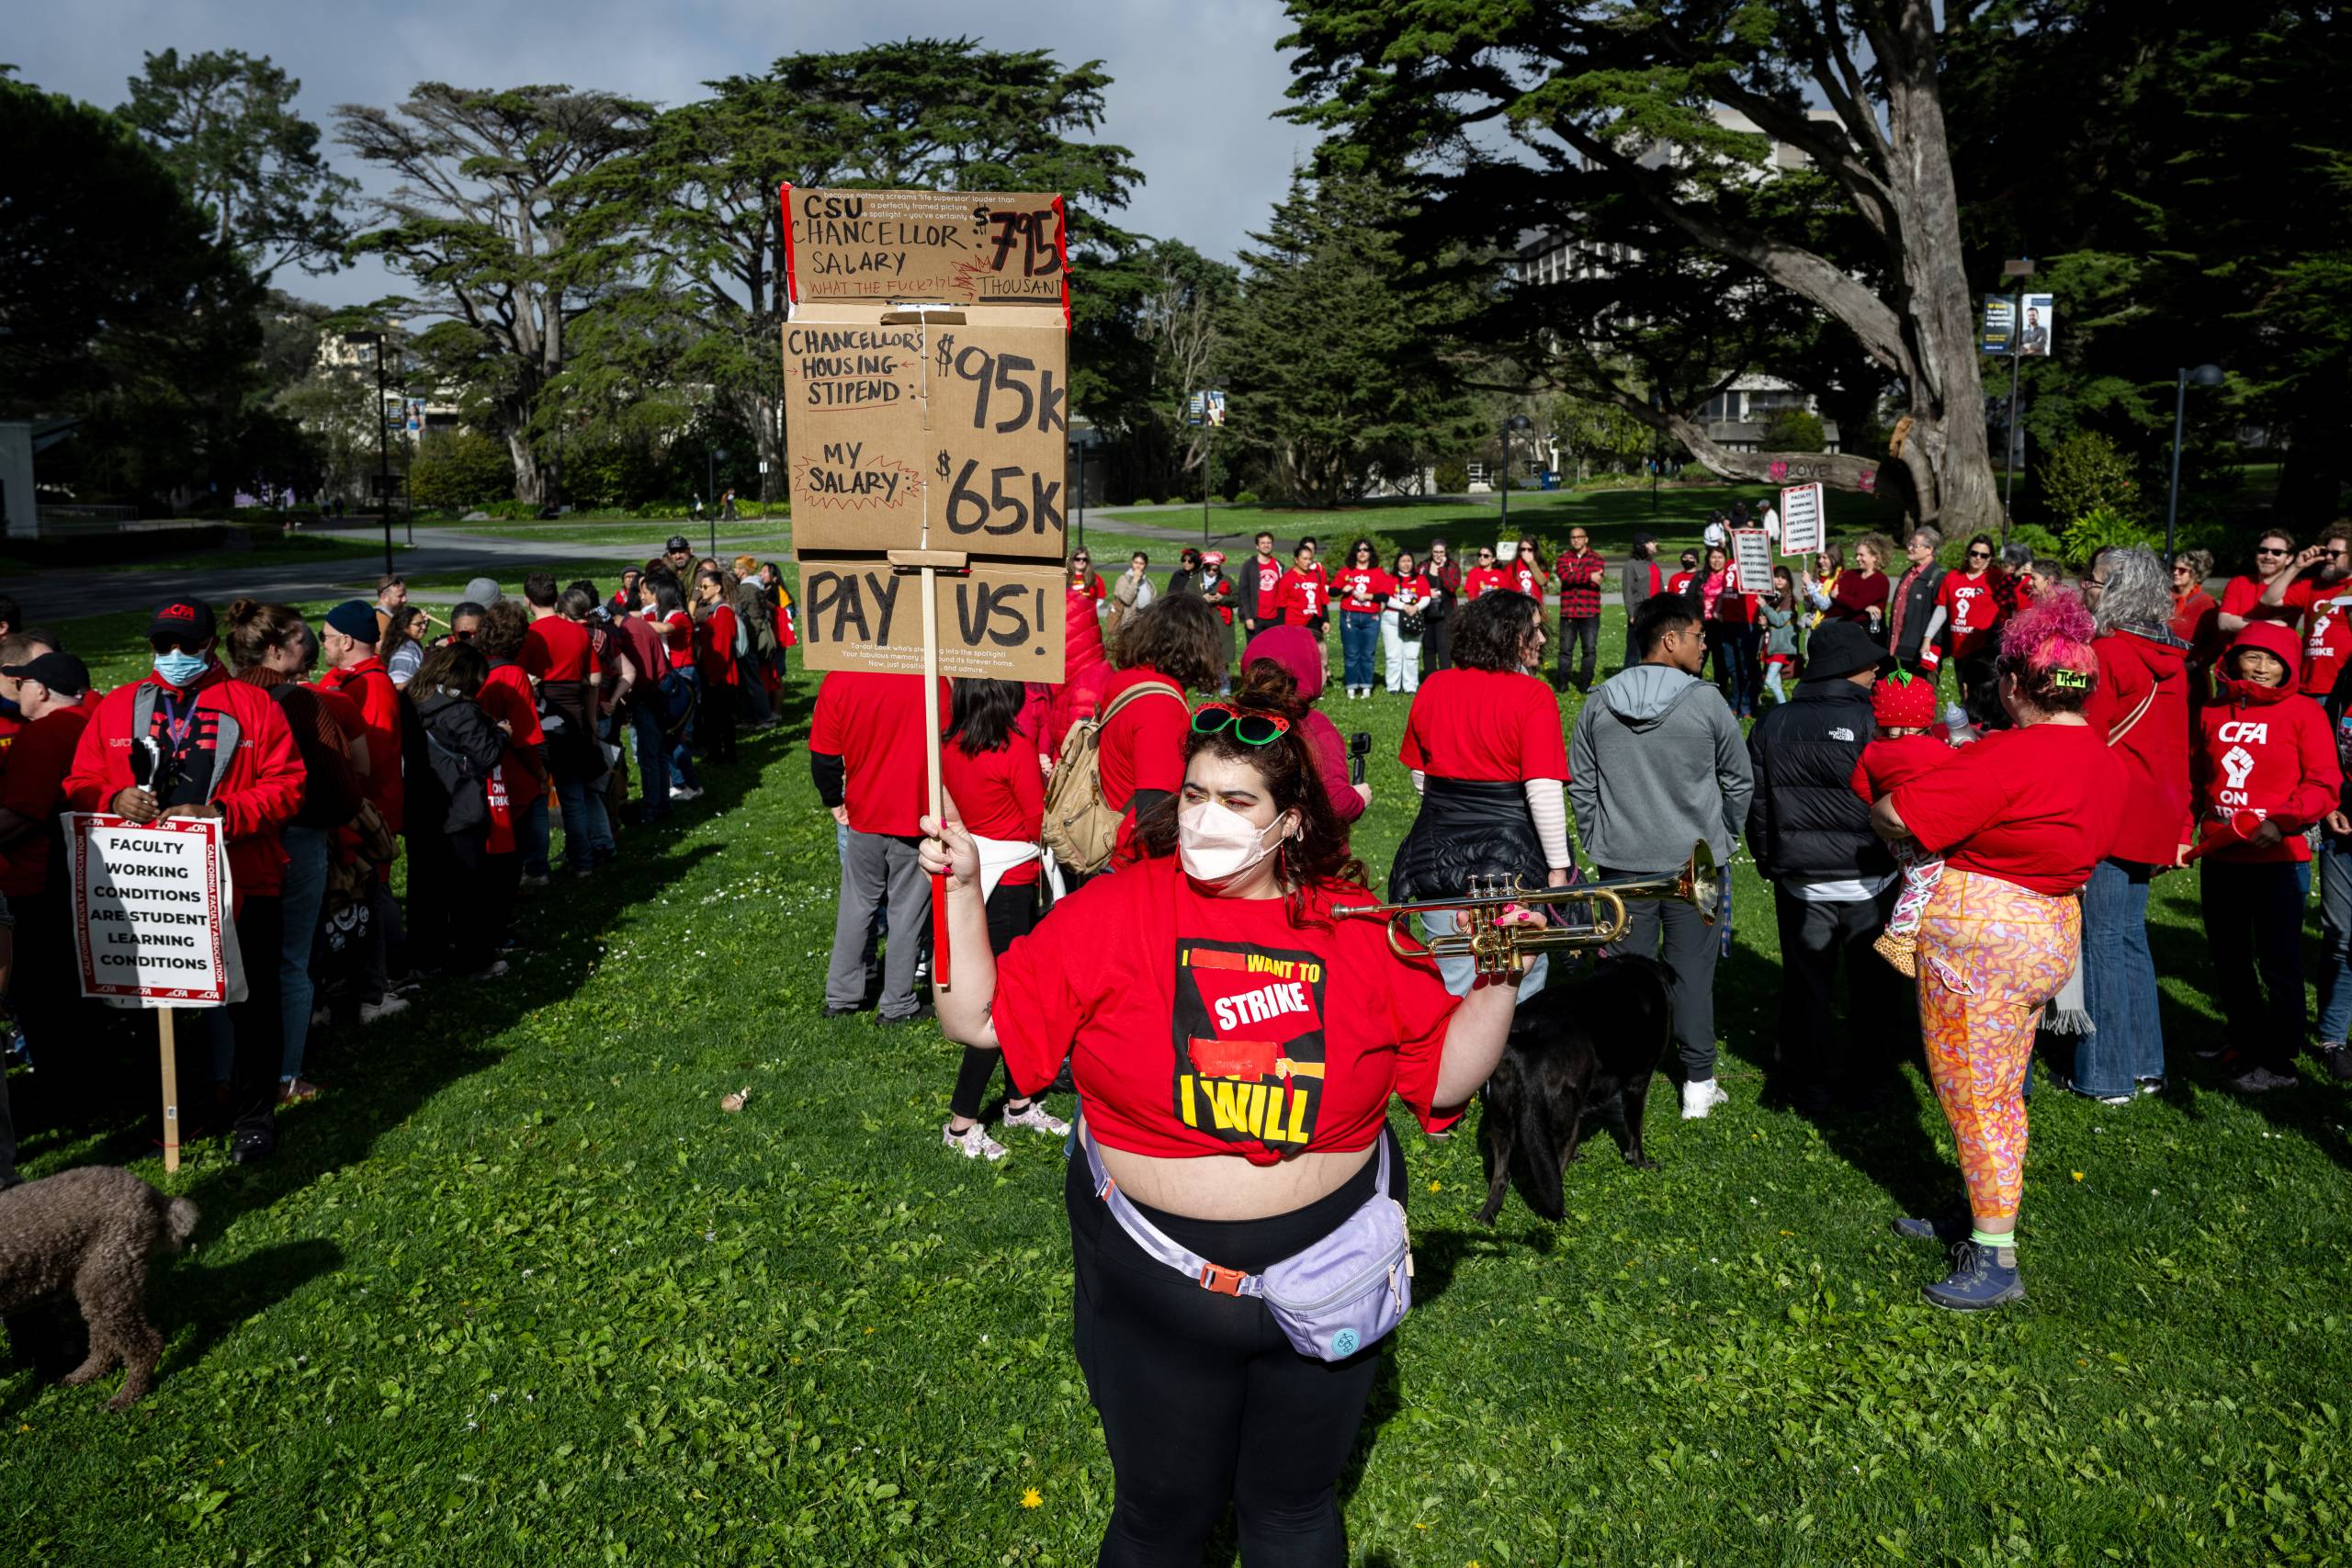 A person wearing a red t-shirt holds a cardboard sign in one hand and a trumpet in the other while standing on a grassy area in front of a group of people in mostly red attire.